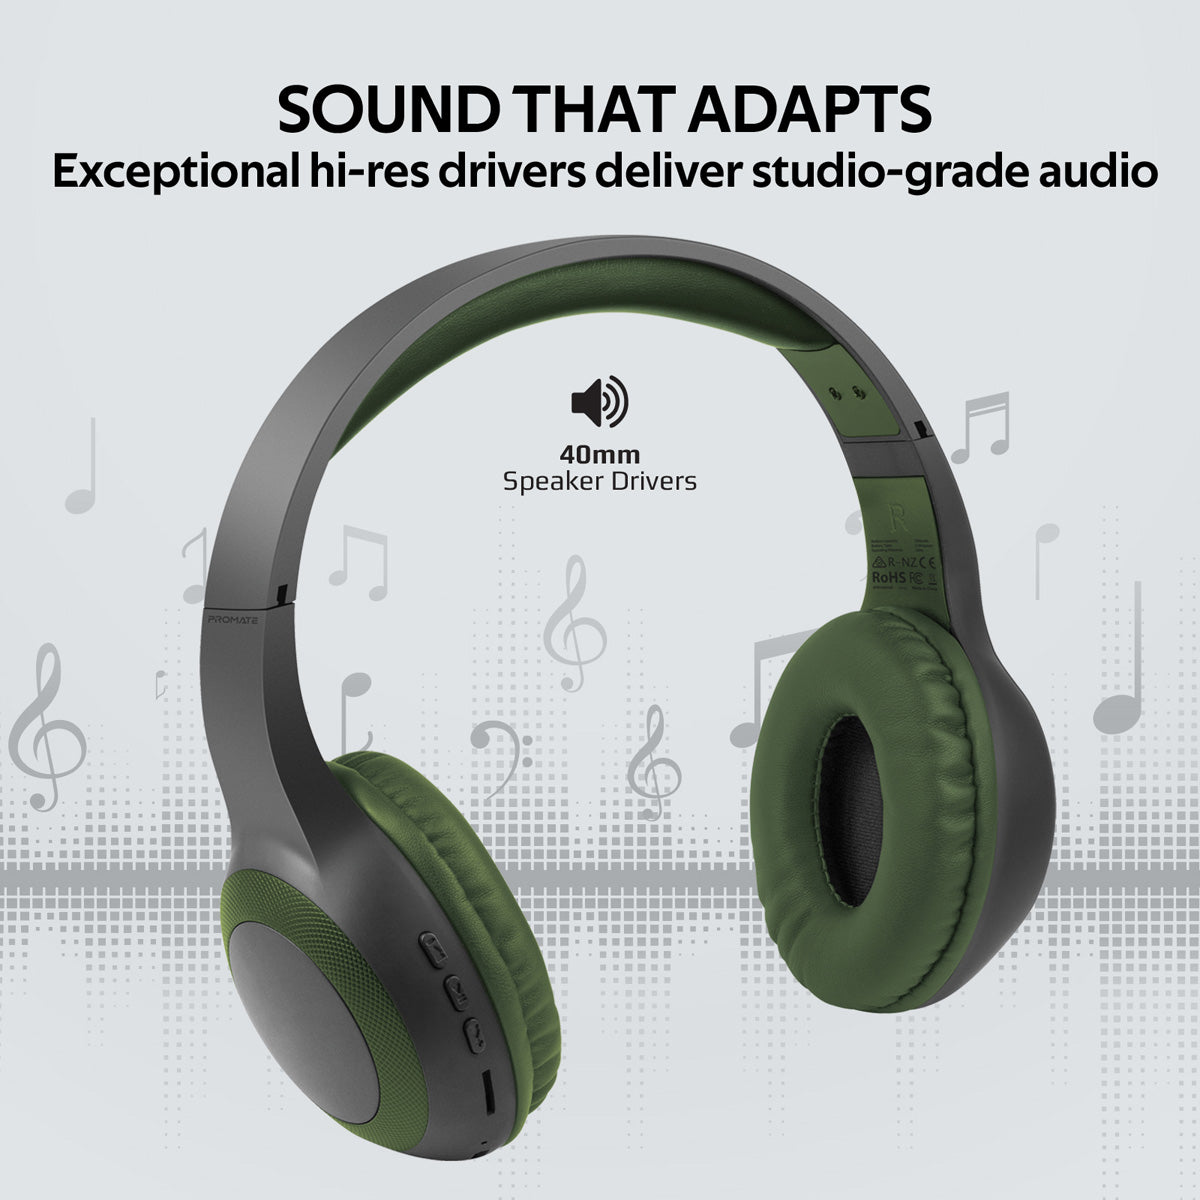 Promate - Bluetooth Headphone, Over-Ear Deep Bass Wired/Wireless Headphone with Long Paytime, Hi-Fi Sound, Built-In Mic, On-Ear Controls, Soft Earpads, MicroSD Card Slot and AUX Port for iPhone, Samsung, iPad Pro, LaBoca Midnight Green